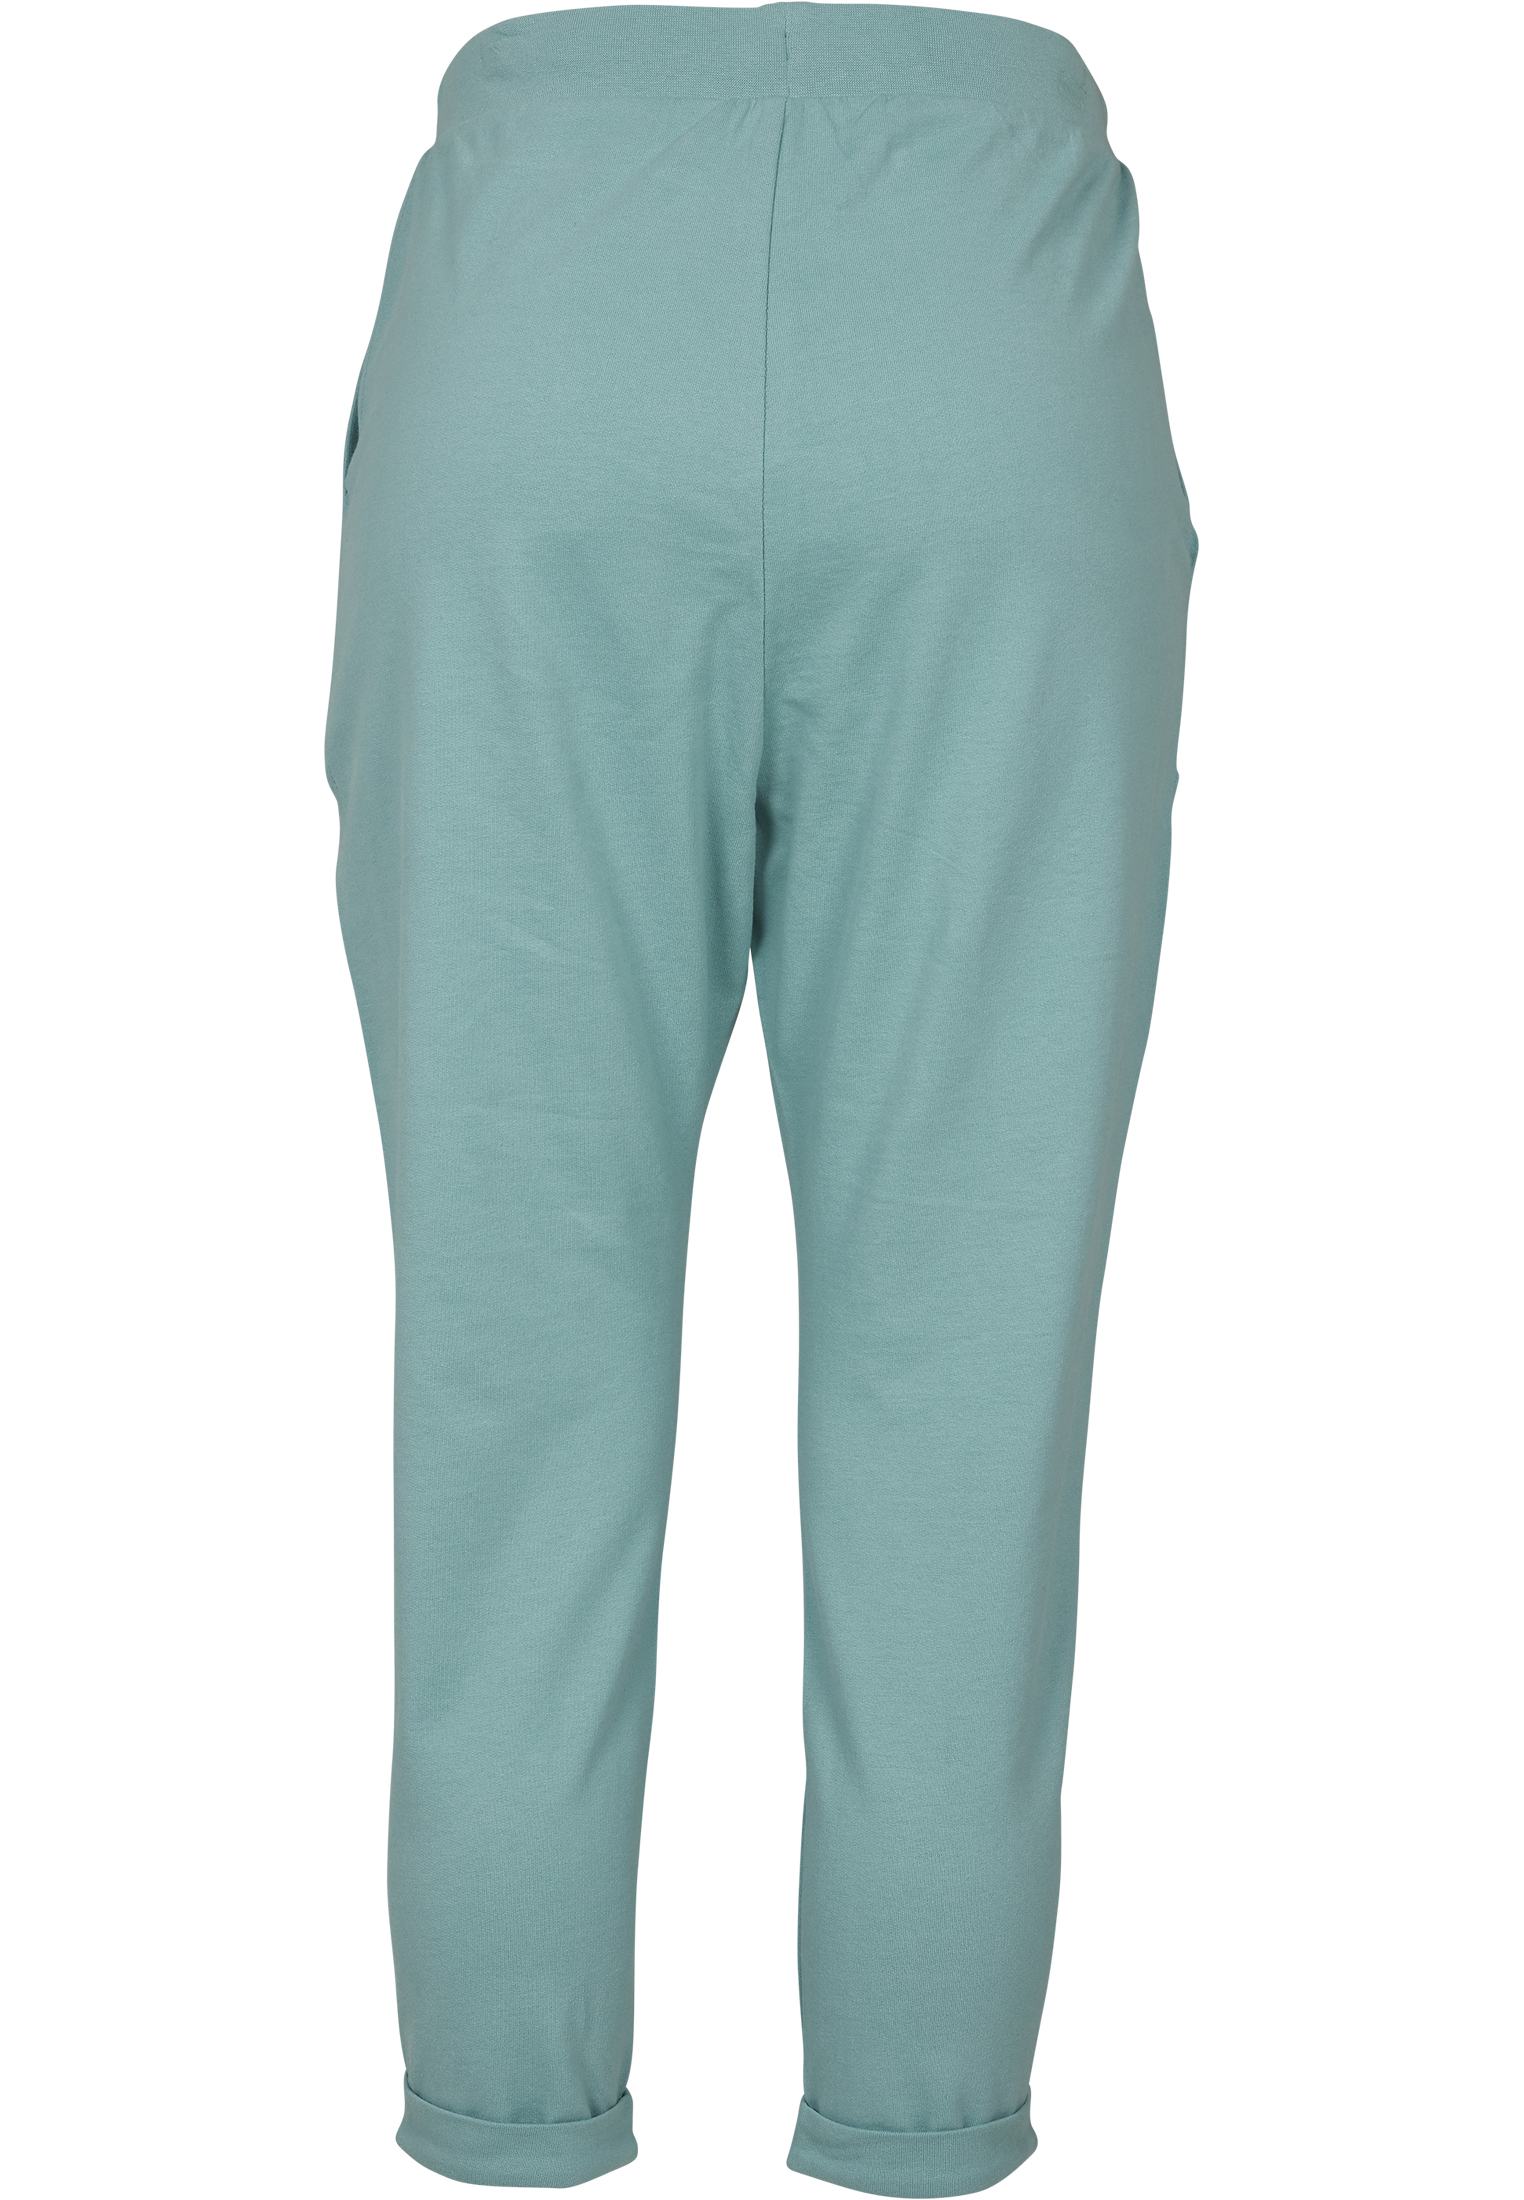 Curvy Ladies Open Edge Terry Turn Up Pants in Farbe bluemint